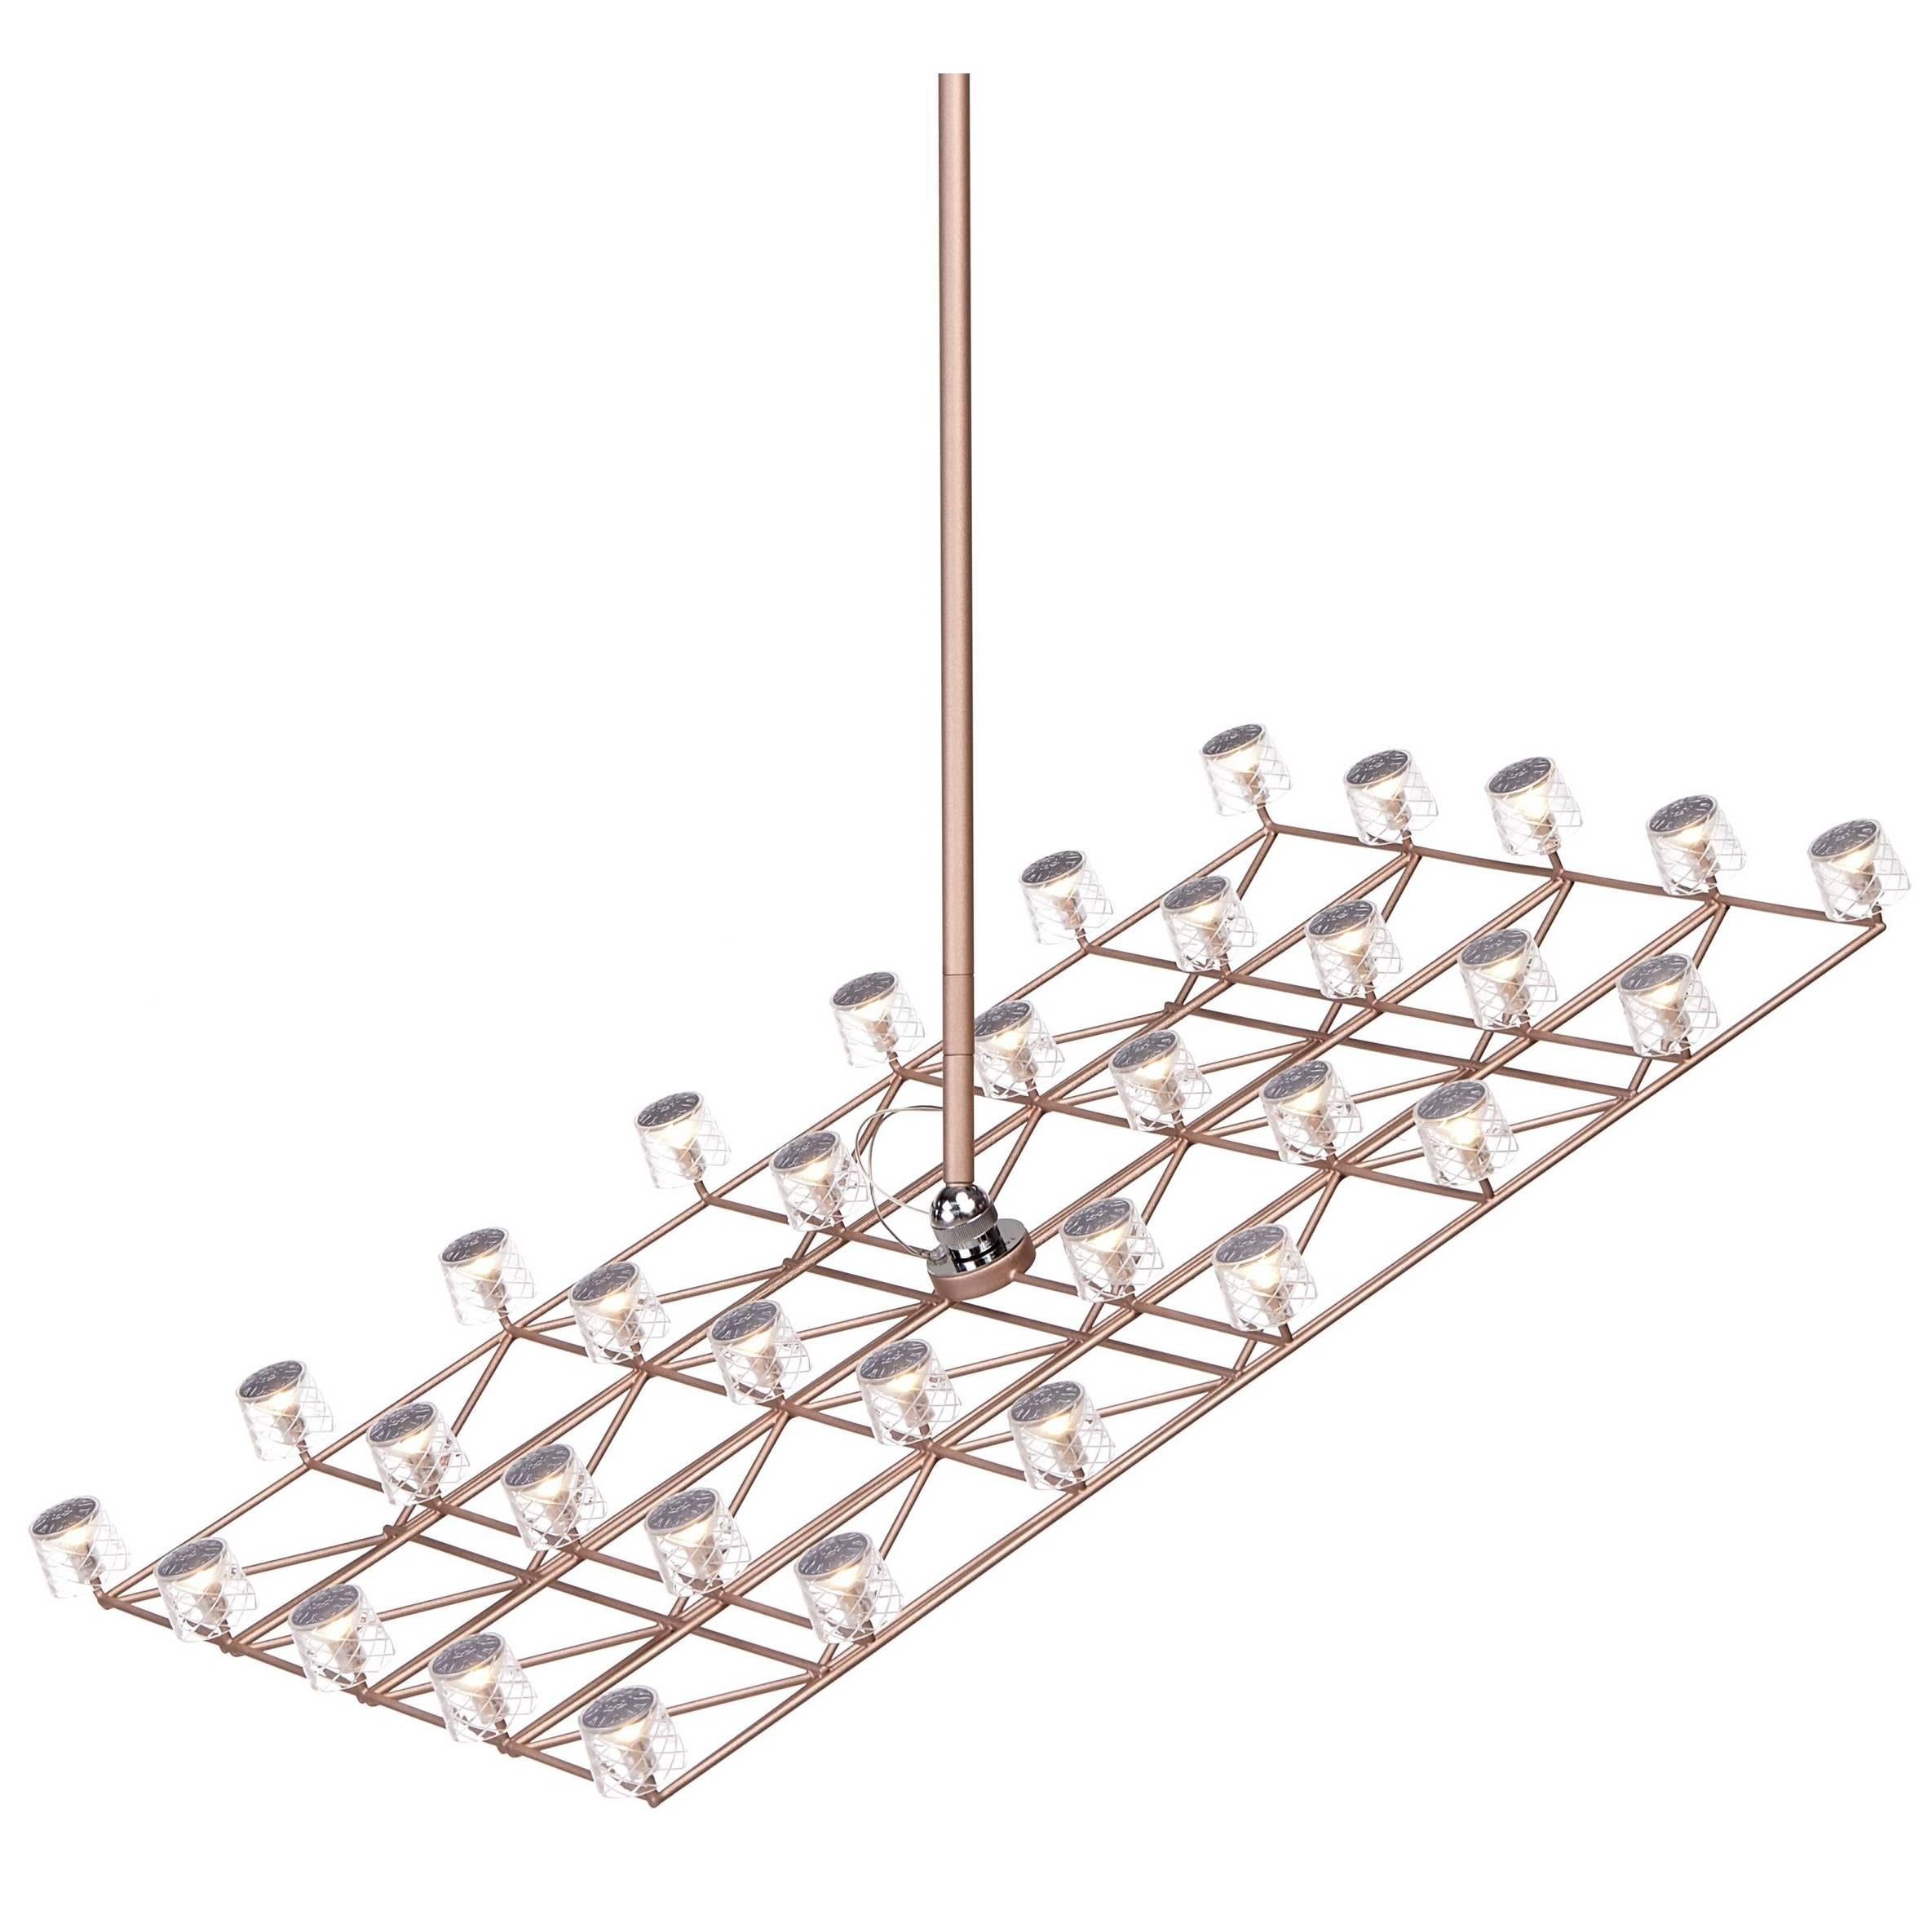 Moooi Space-Frame Small Suspension Light Fixture by Marcel Wanders im Angebot